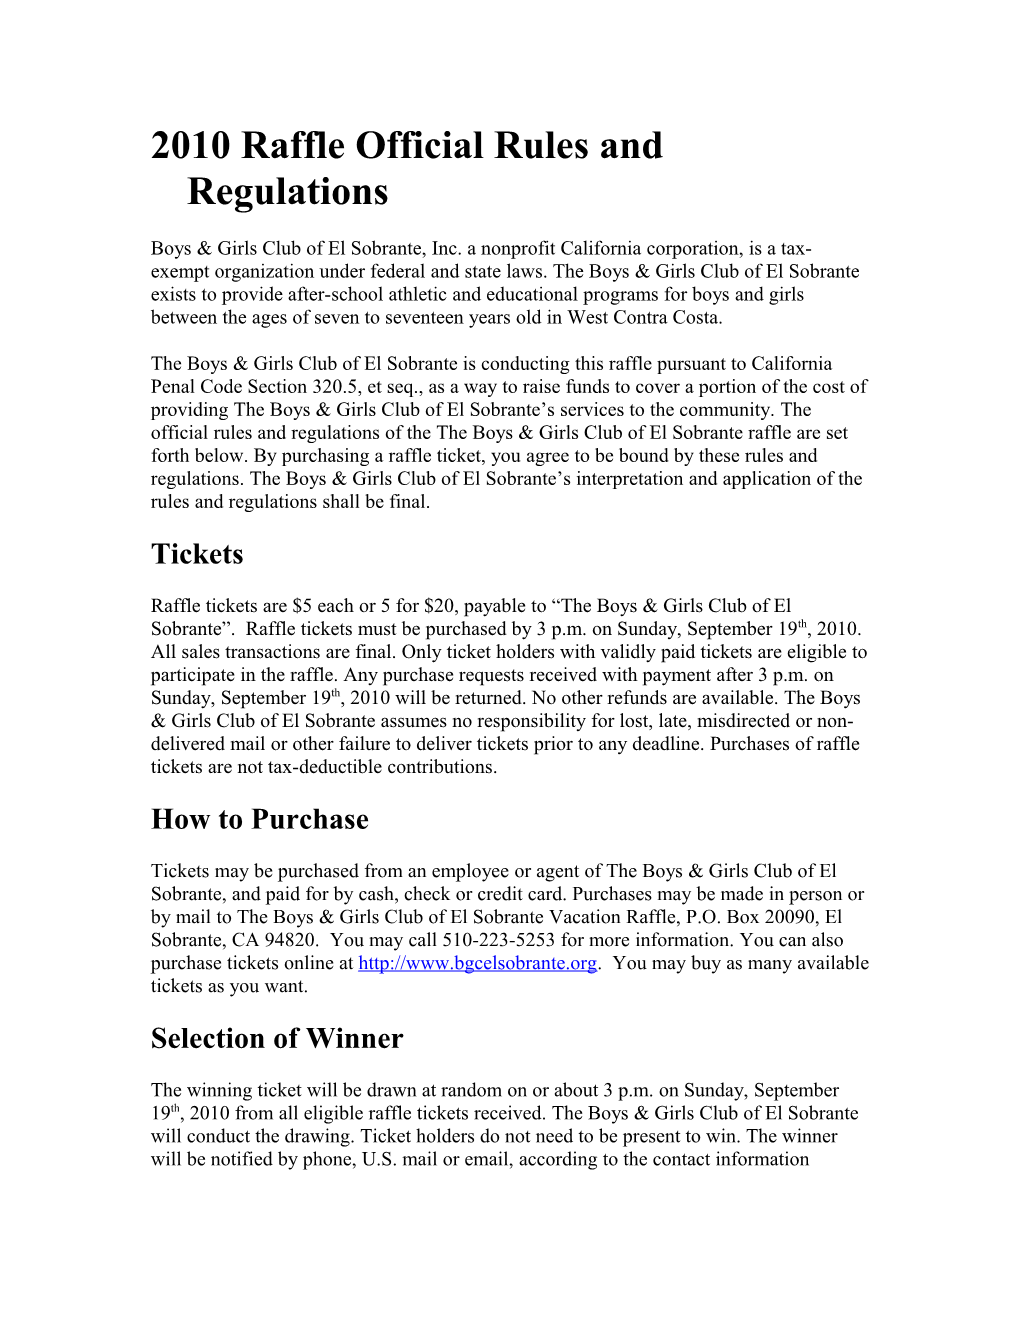 2008 Raffle Official Rules and Regulations